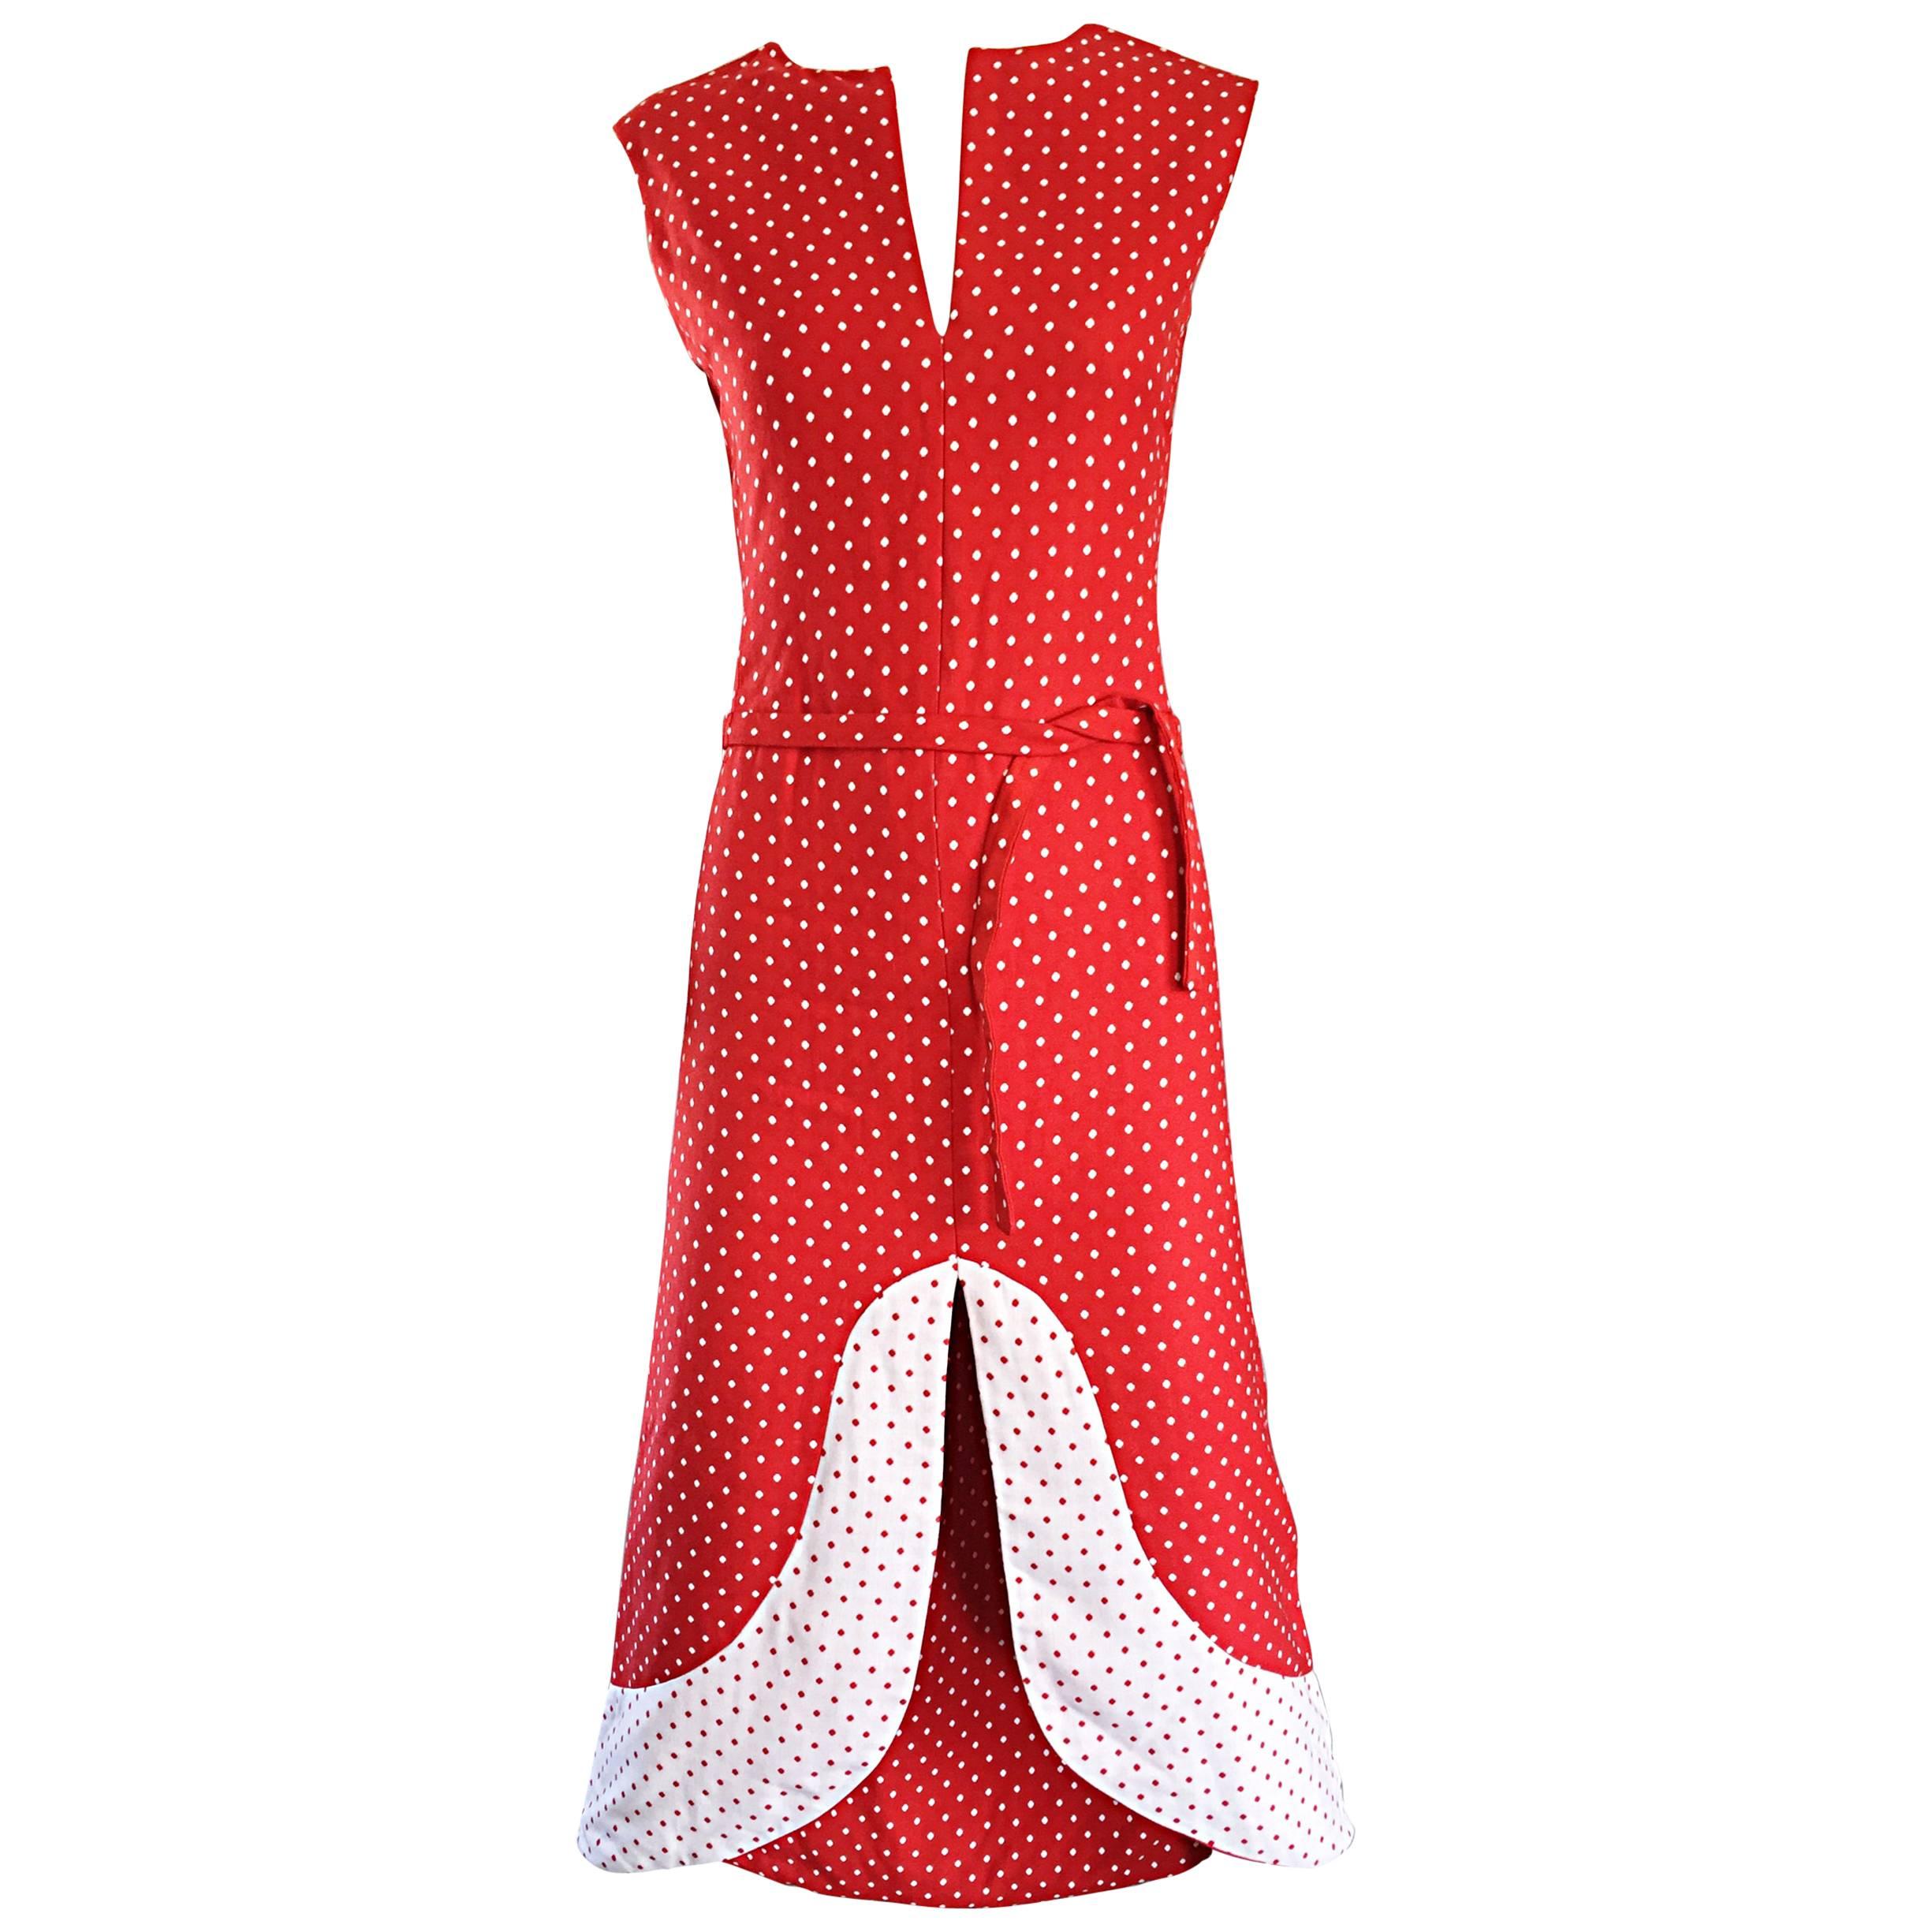 1960s Pierre Cardin Couture Vintage Space Age Red White Polka Dot Cut Out Dress For Sale